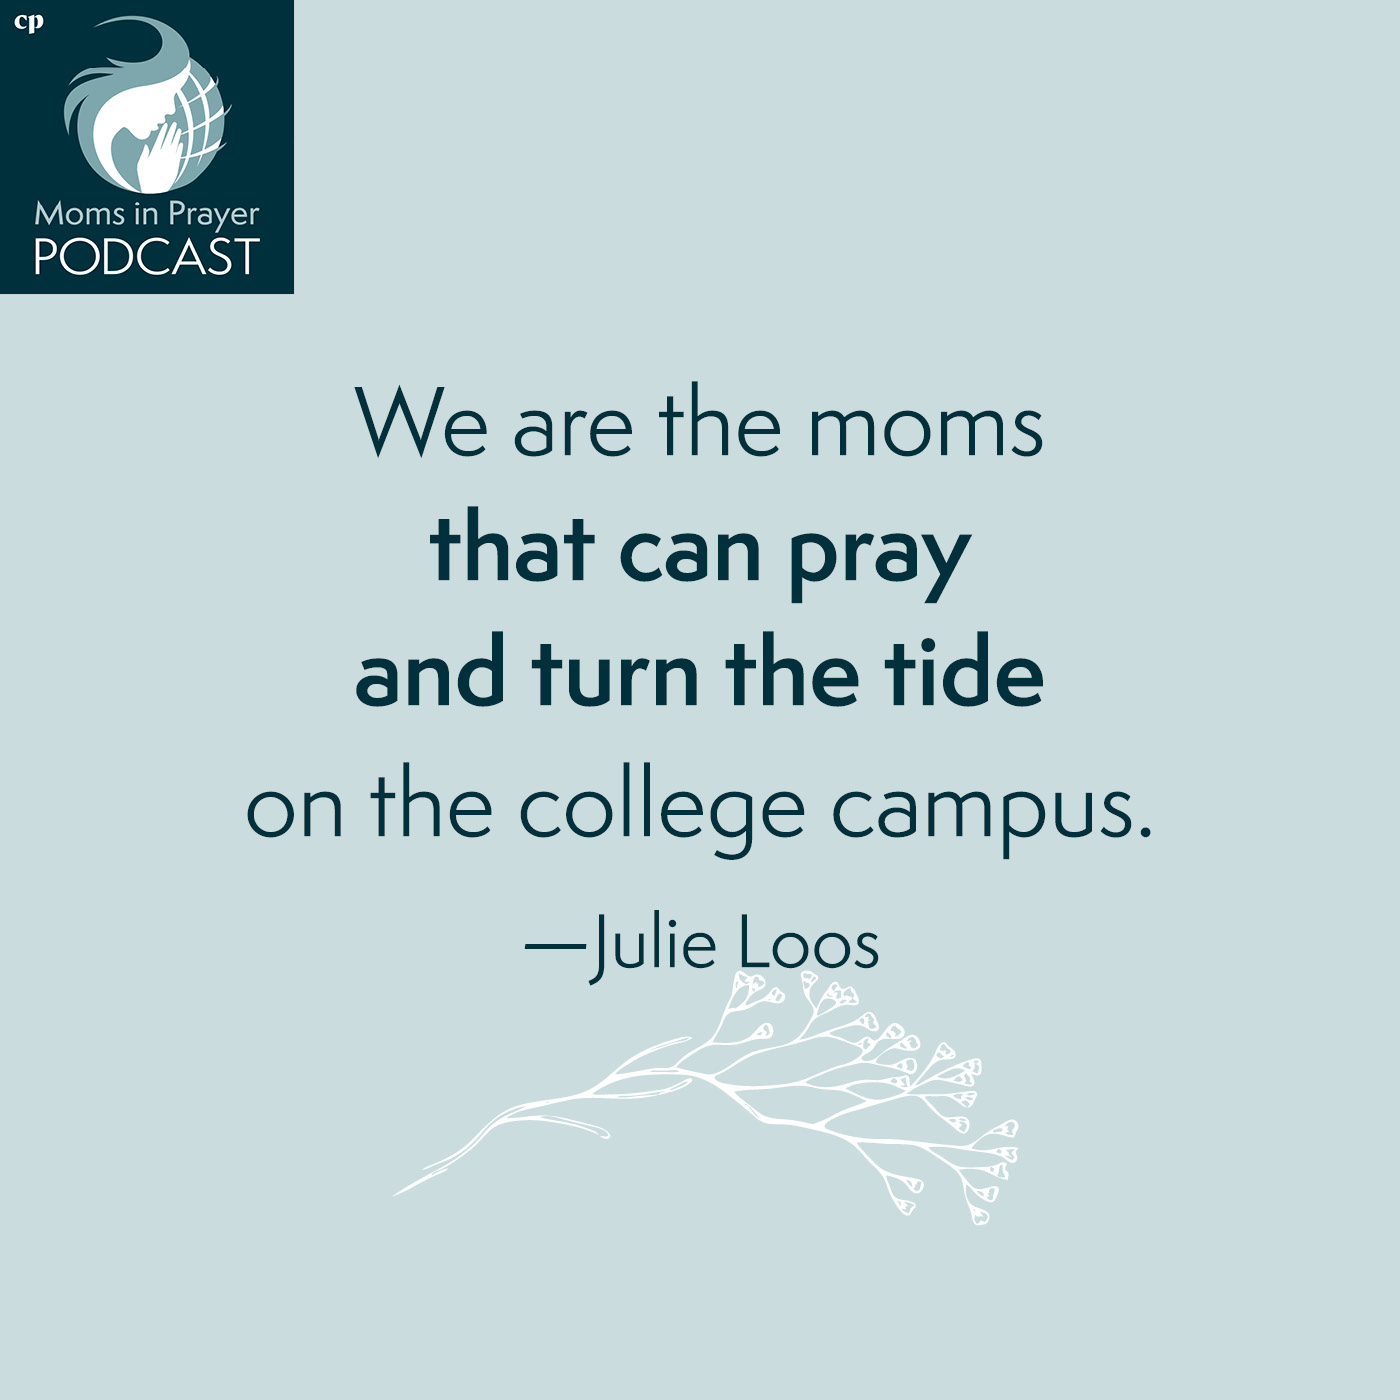 We are the moms who pray and turn the tide on the college campus